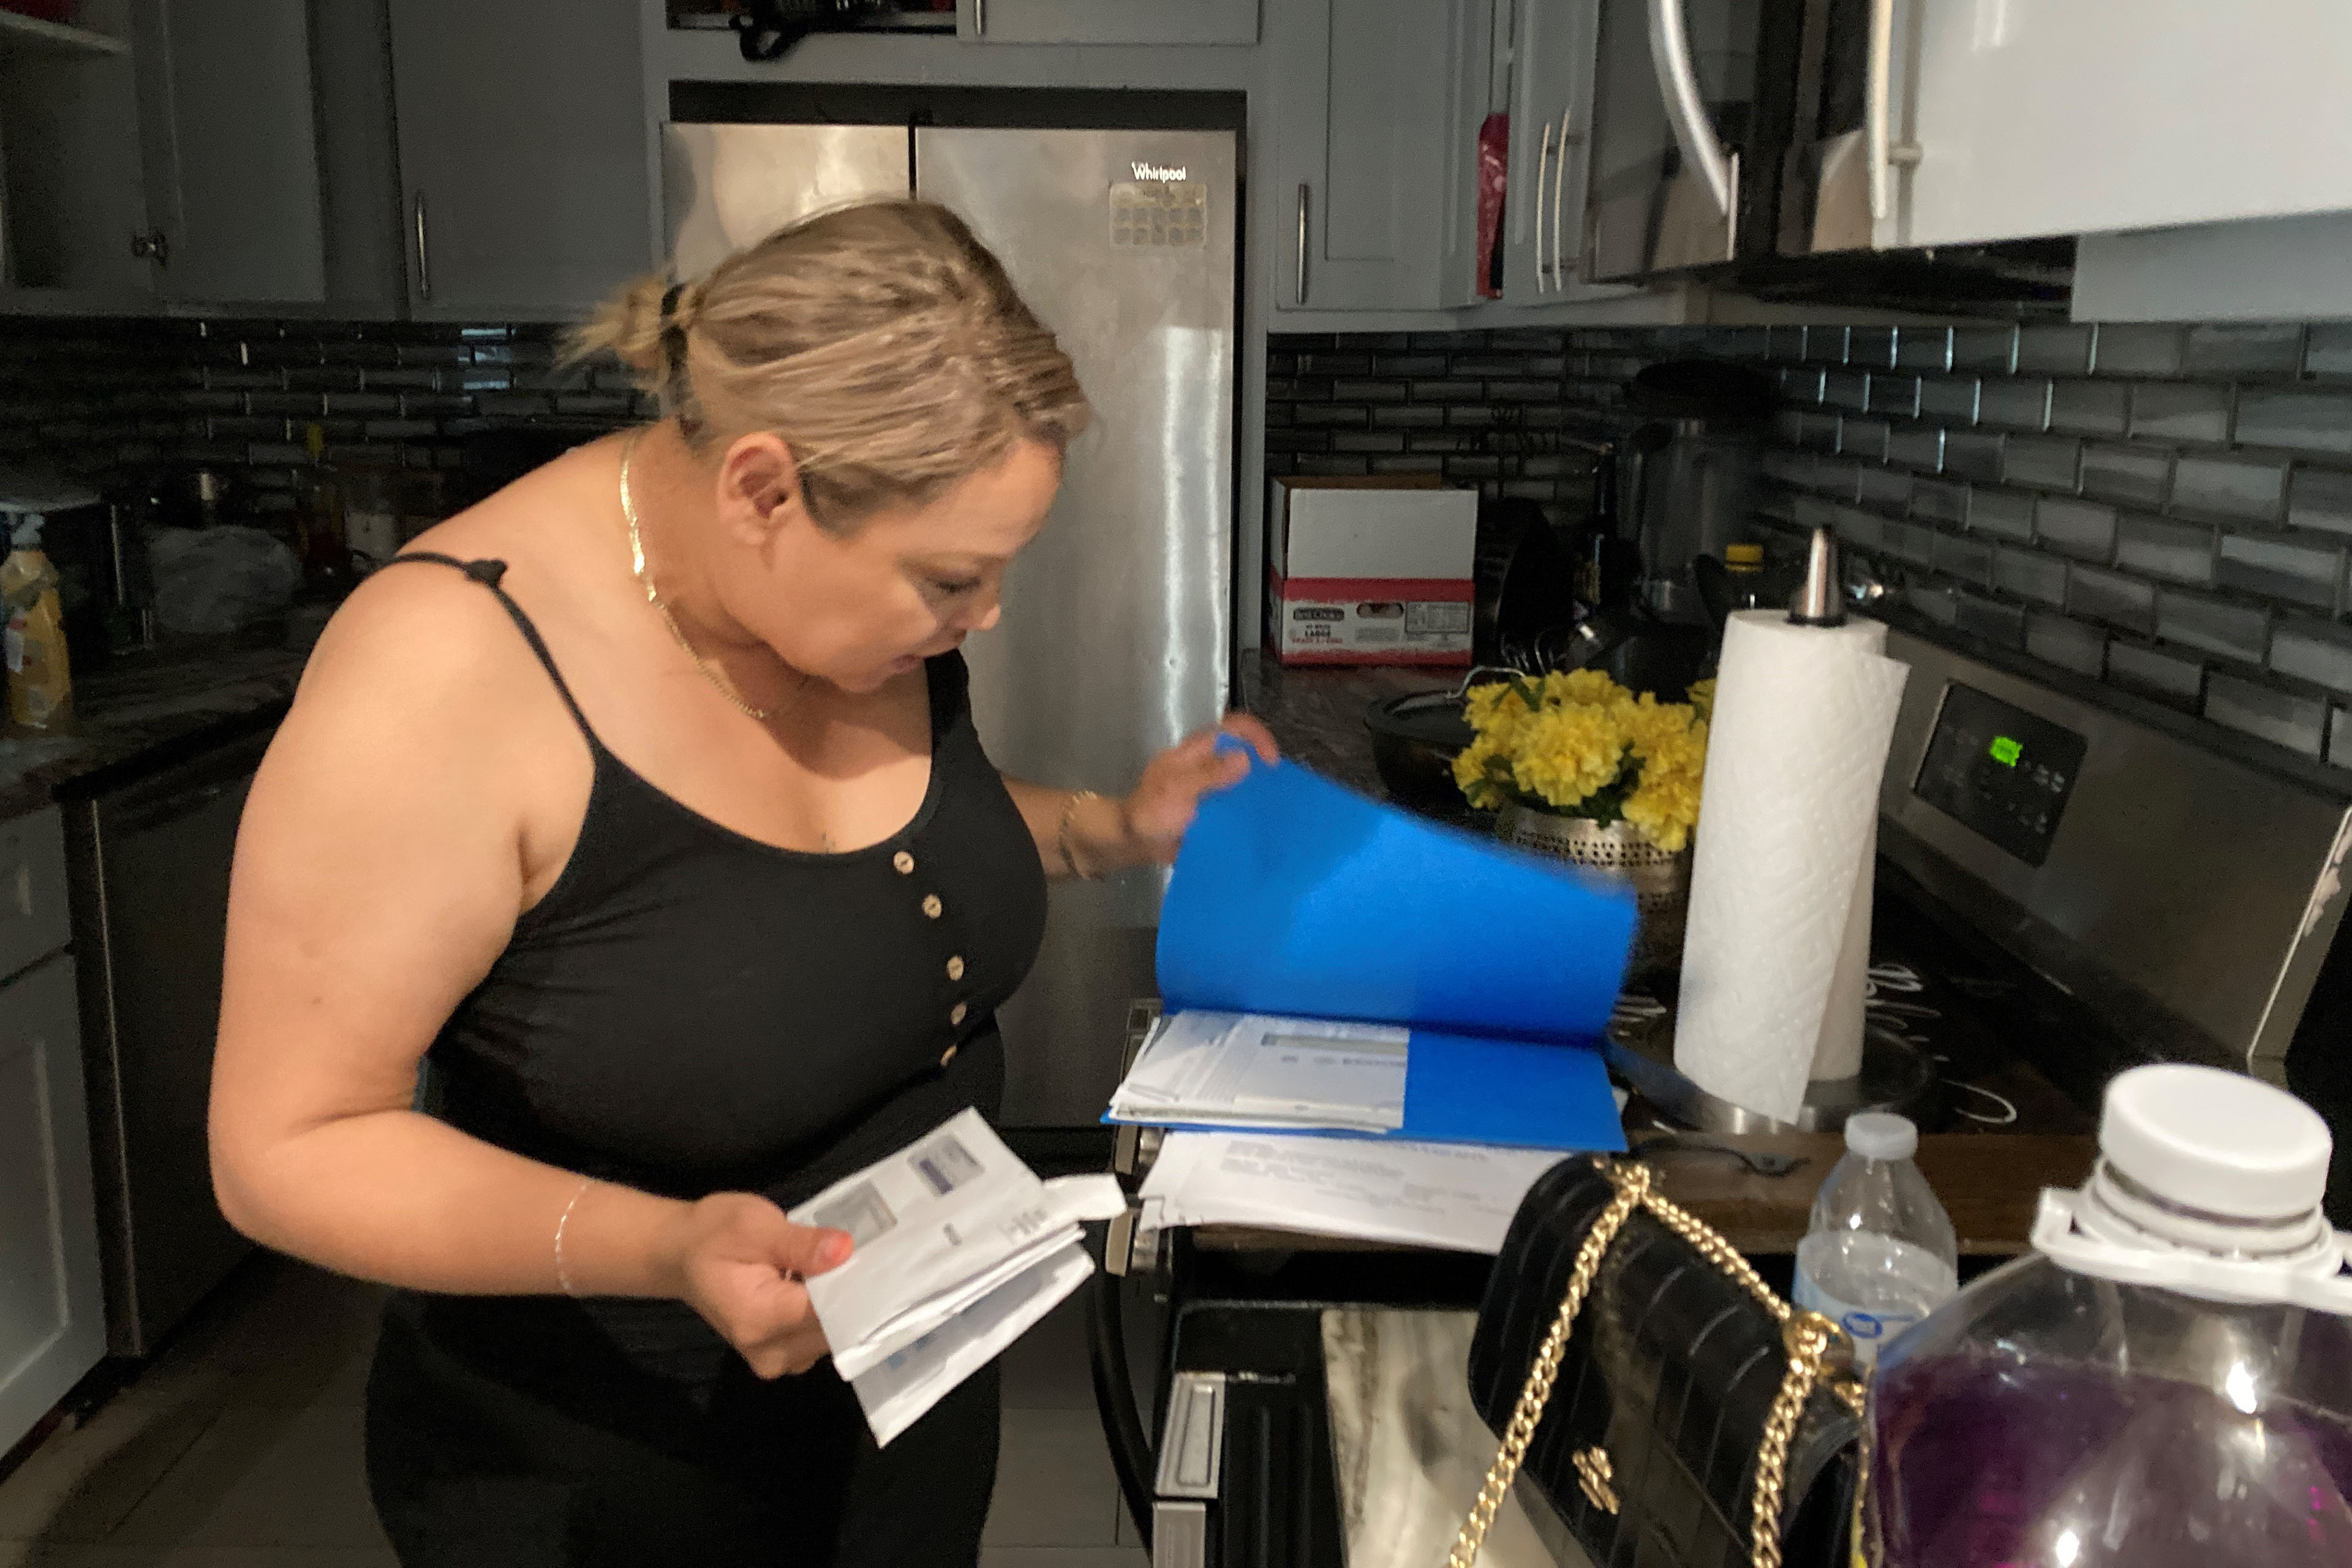 Abigail Arellano, standing in her kitchen, looks over a stack of bills in a blue folder.